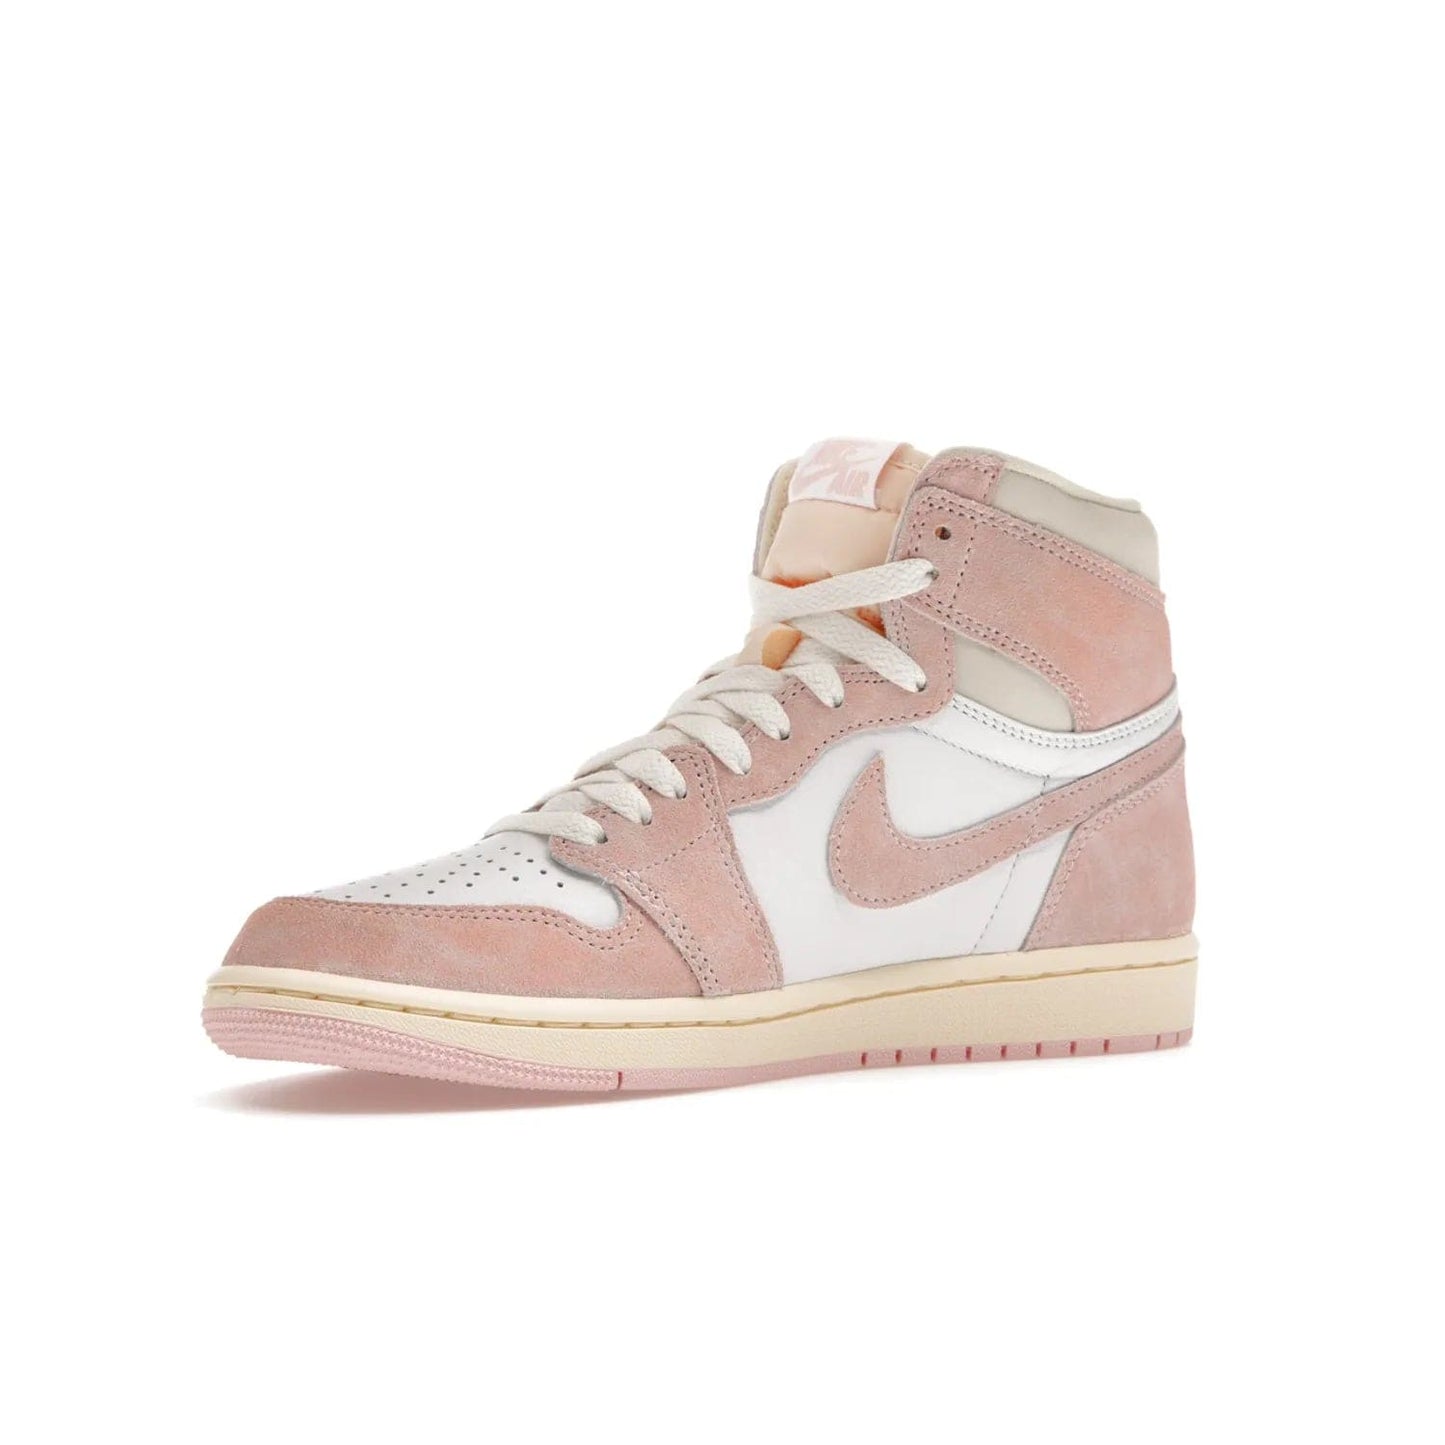 Jordan 1 Retro High OG Washed Pink (Women's) - Image 16 - Only at www.BallersClubKickz.com - Iconic Air Jordan 1 Retro High OG for women with unique pink suede and white leather uppers. Get the timeless look on April 22, 2023.